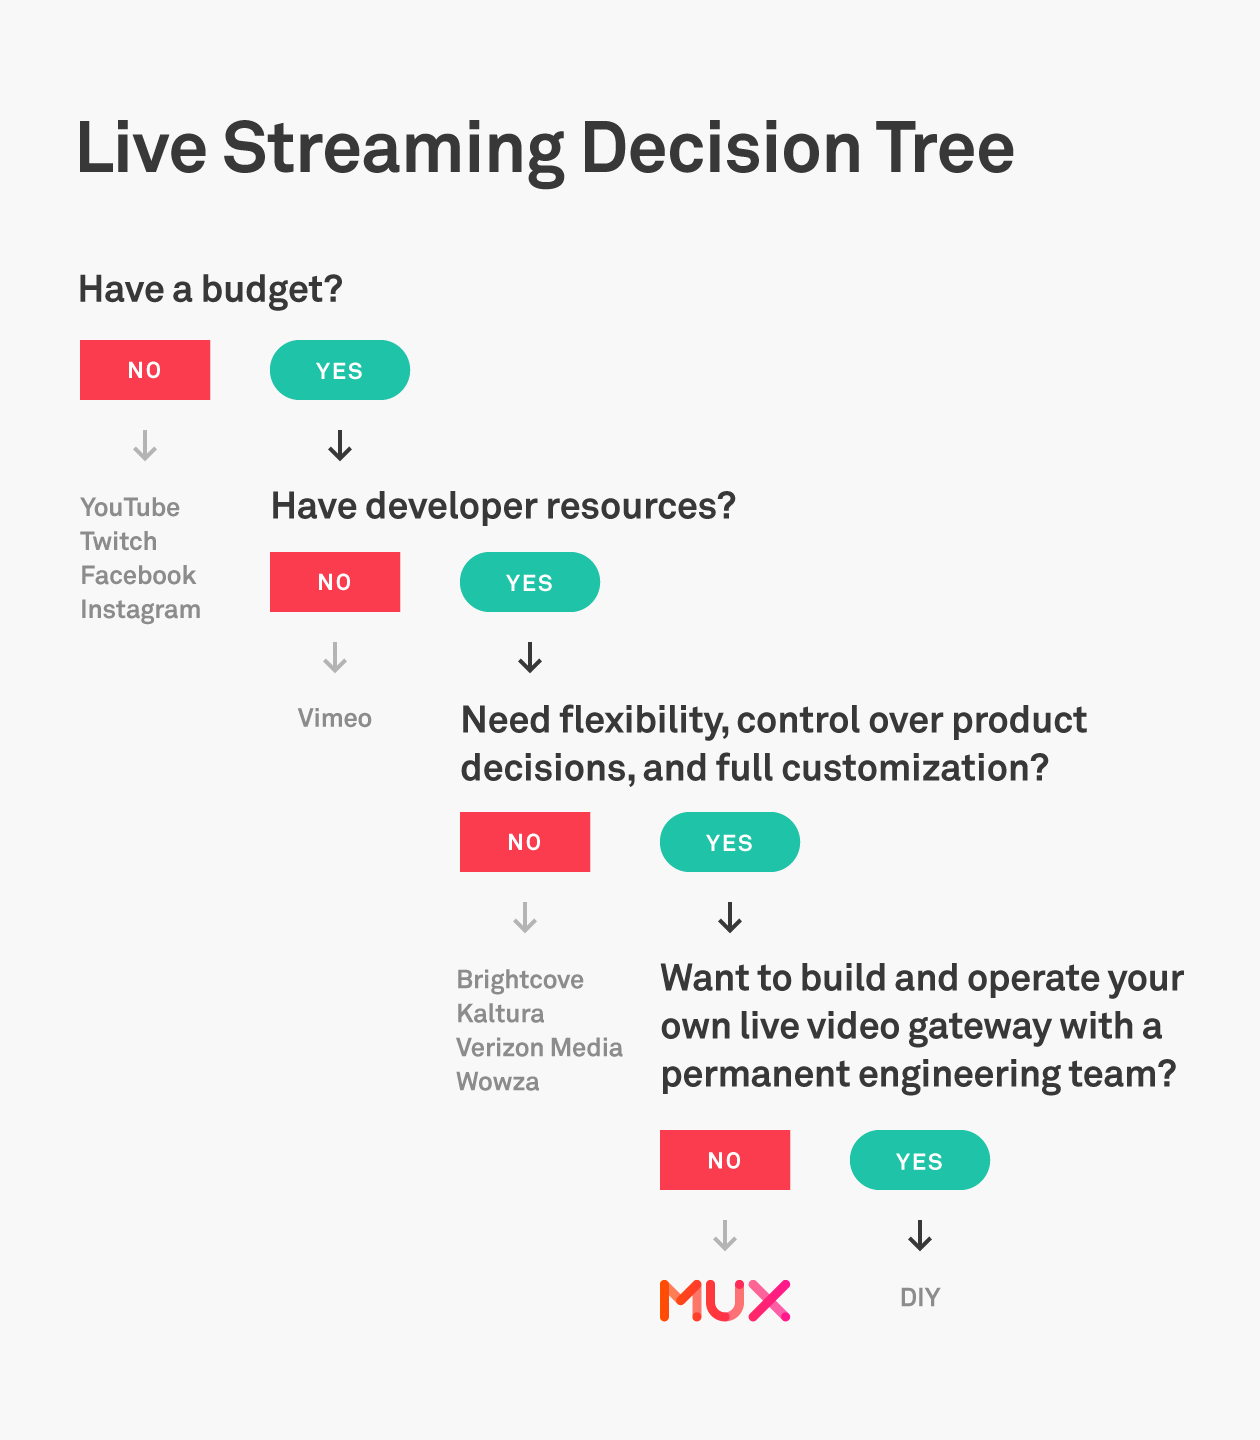 Live streaming decision tree